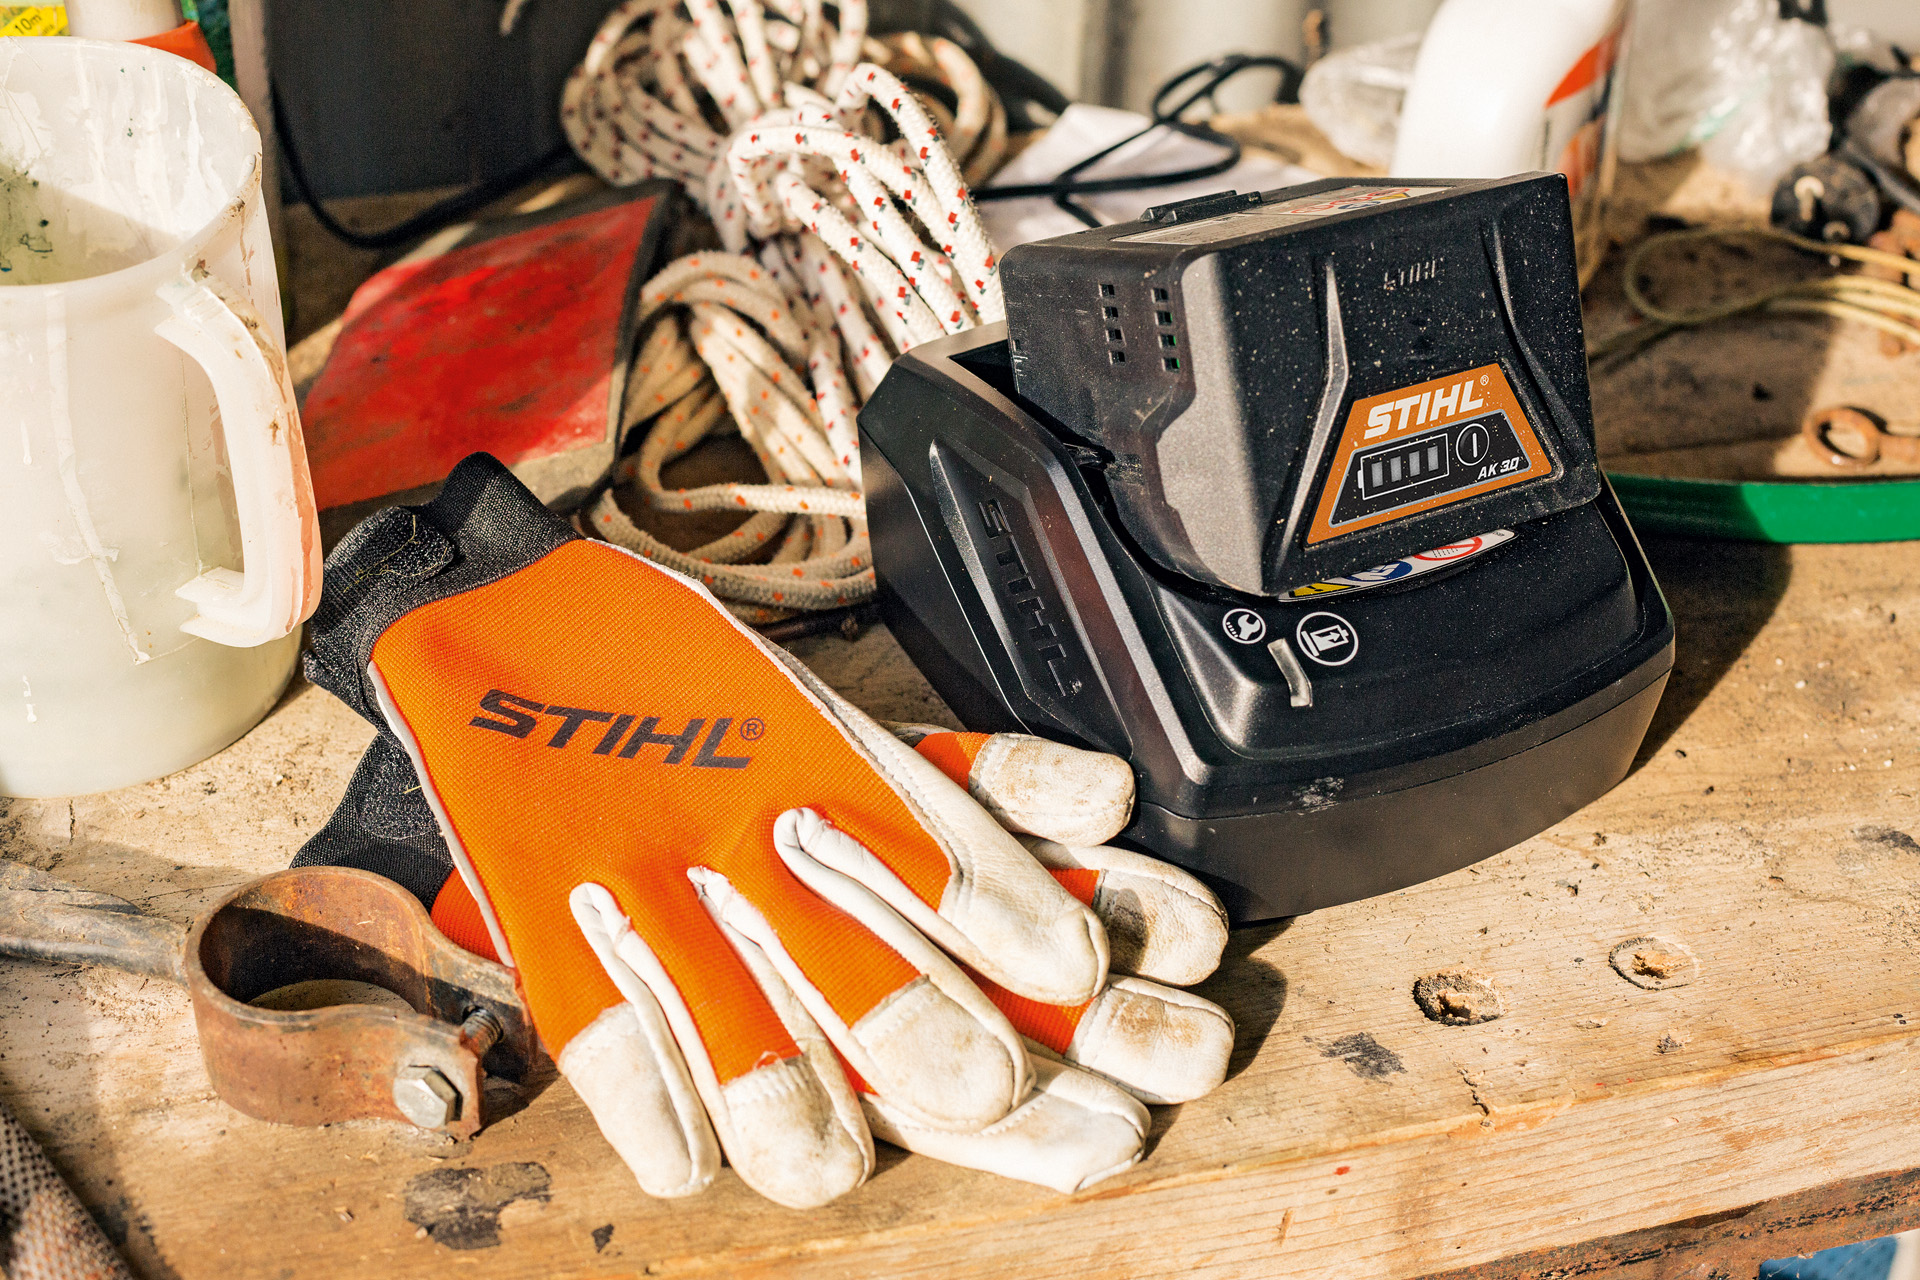 A STIHL AK Series lithium-ion battery being charged alongside gloves